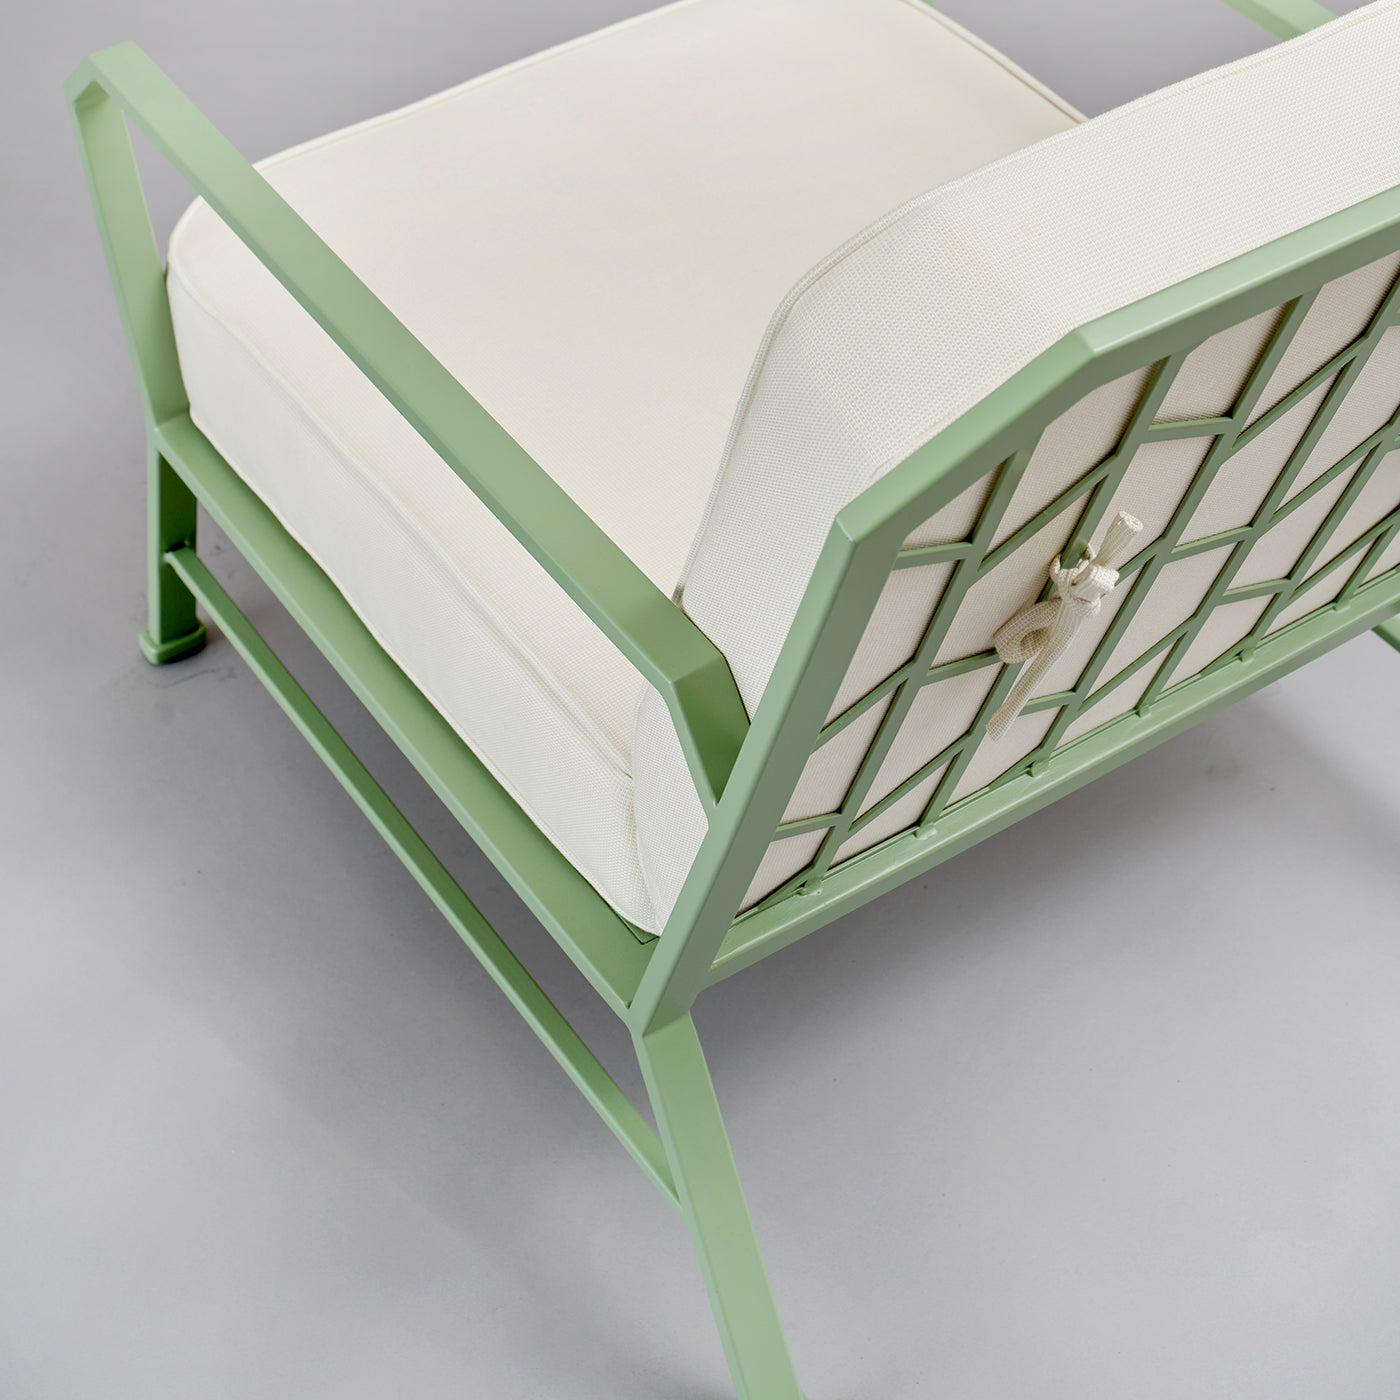 Forest Green and White Armchair by Officina Ciani in Stainless Steel - Alternative view 1